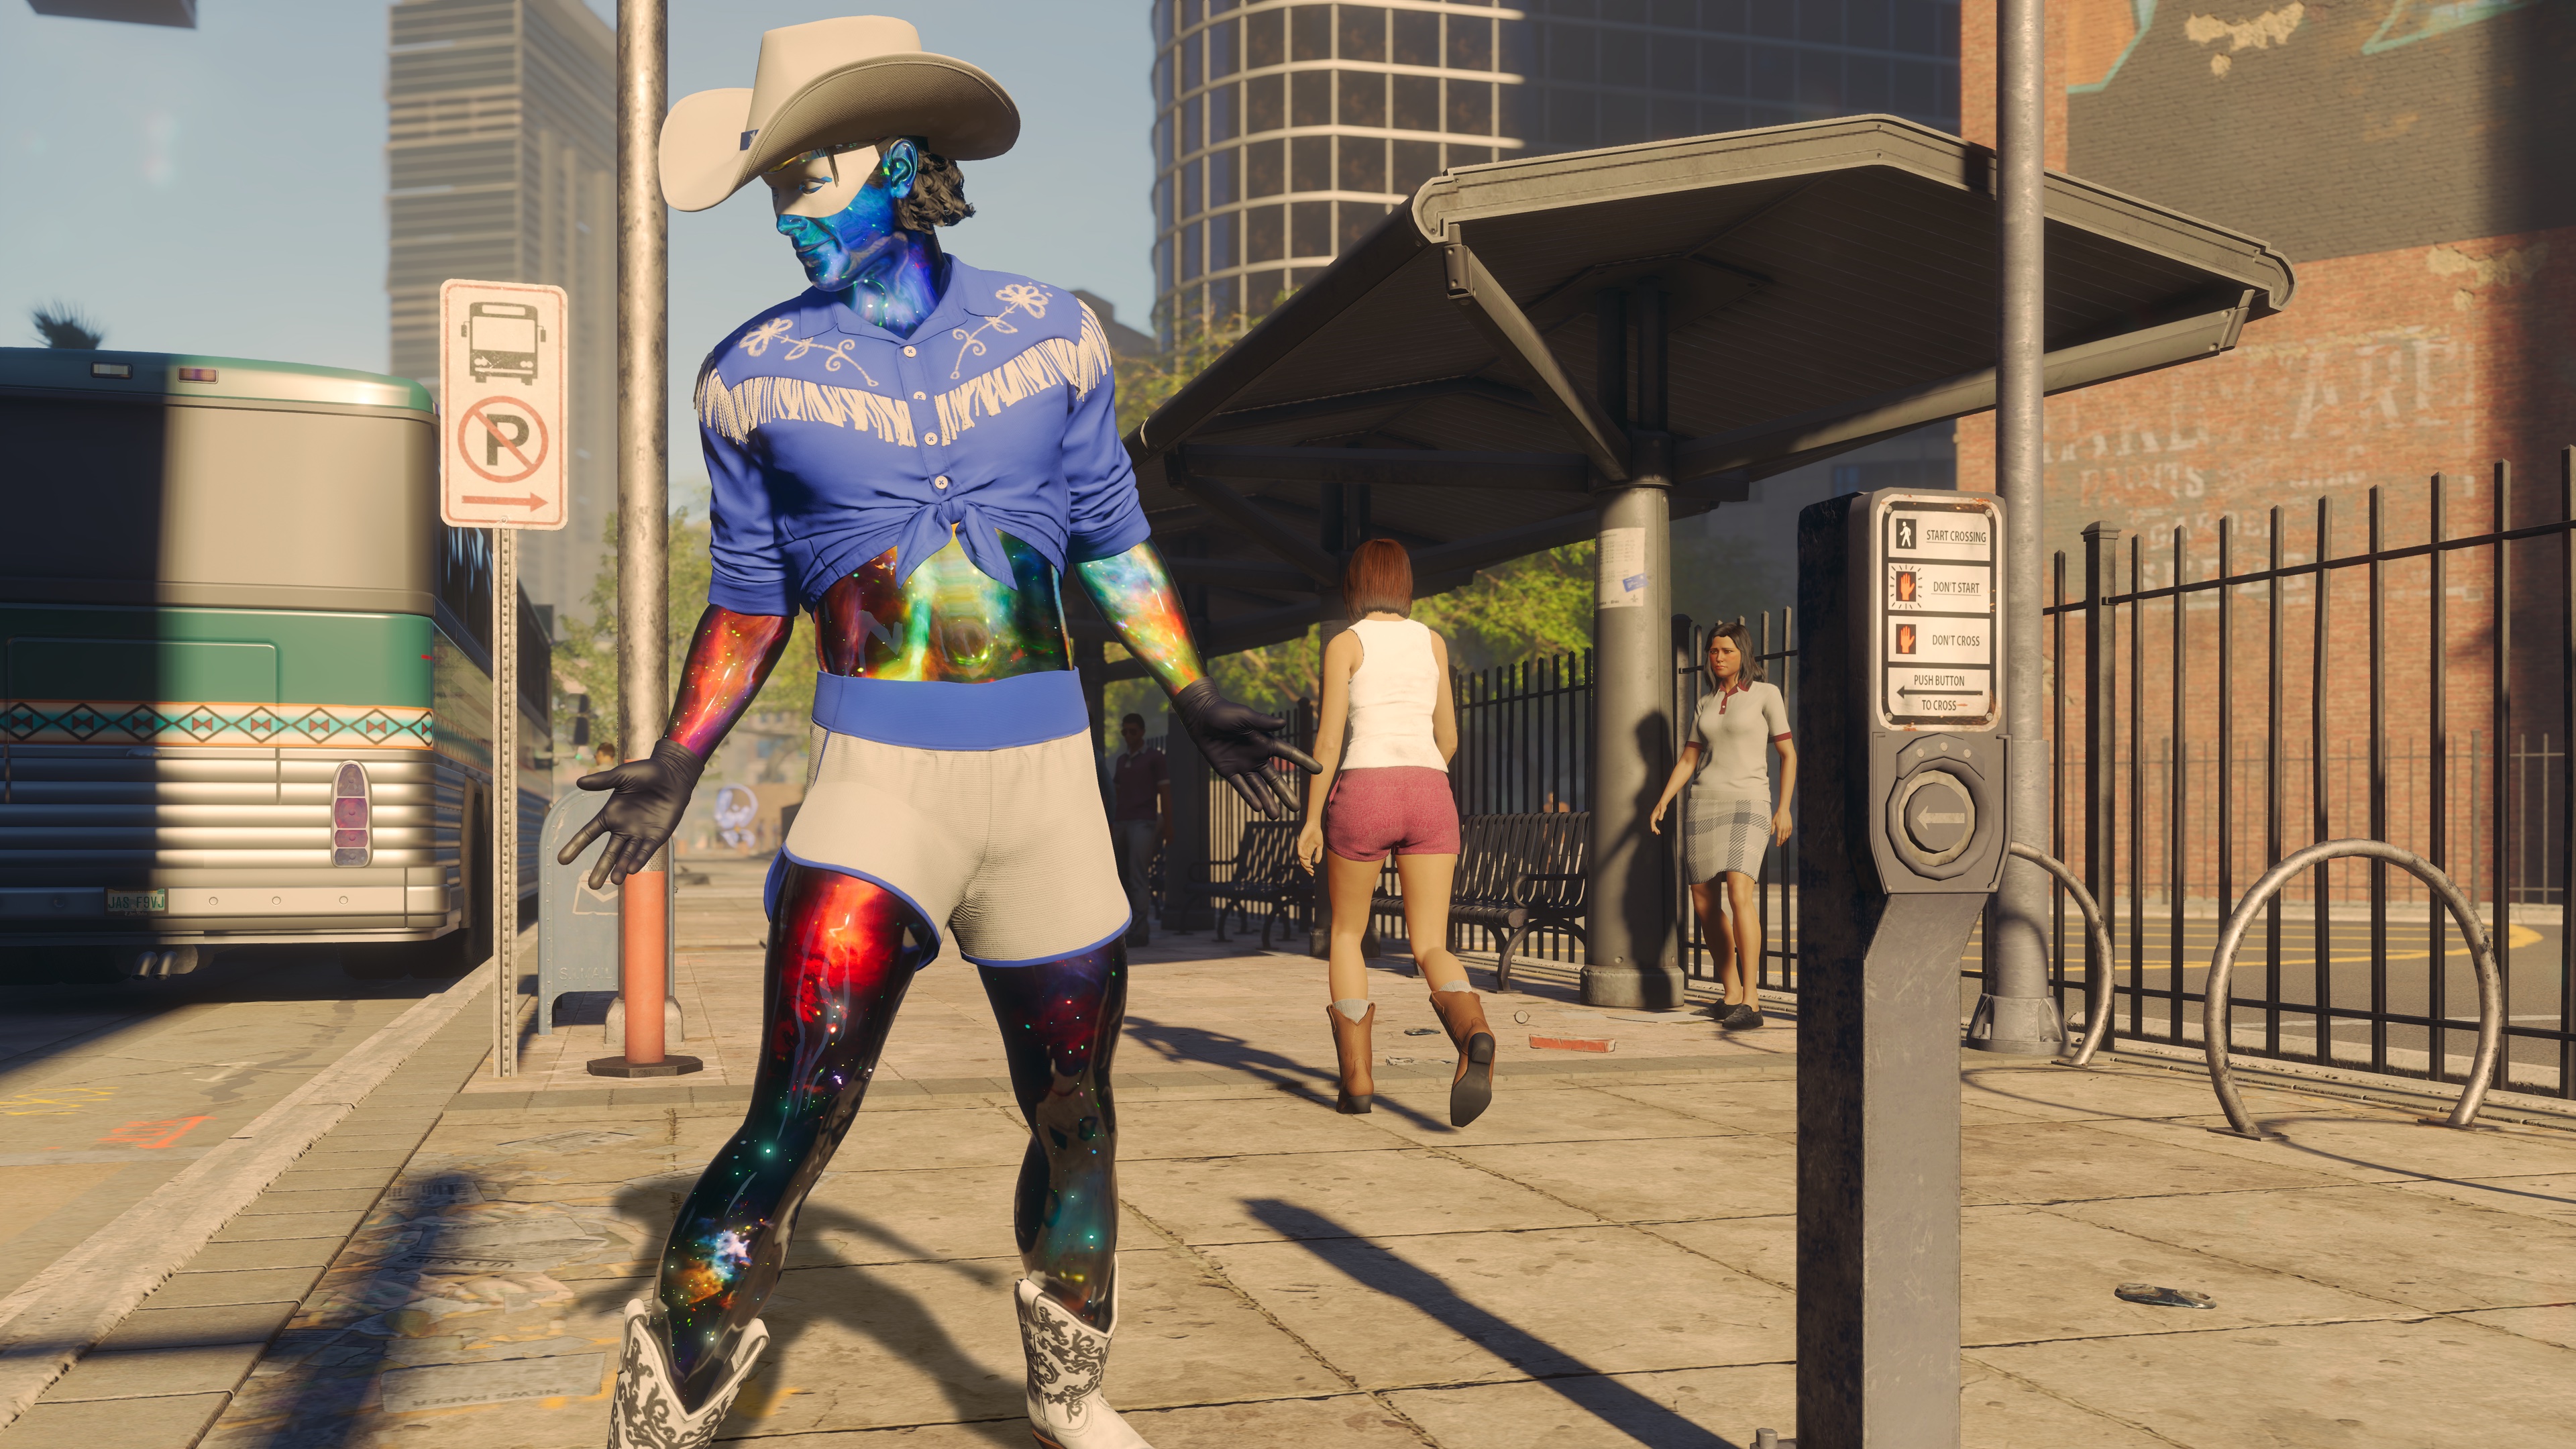 Saints Row reboot’s wild character creator lets you make anything